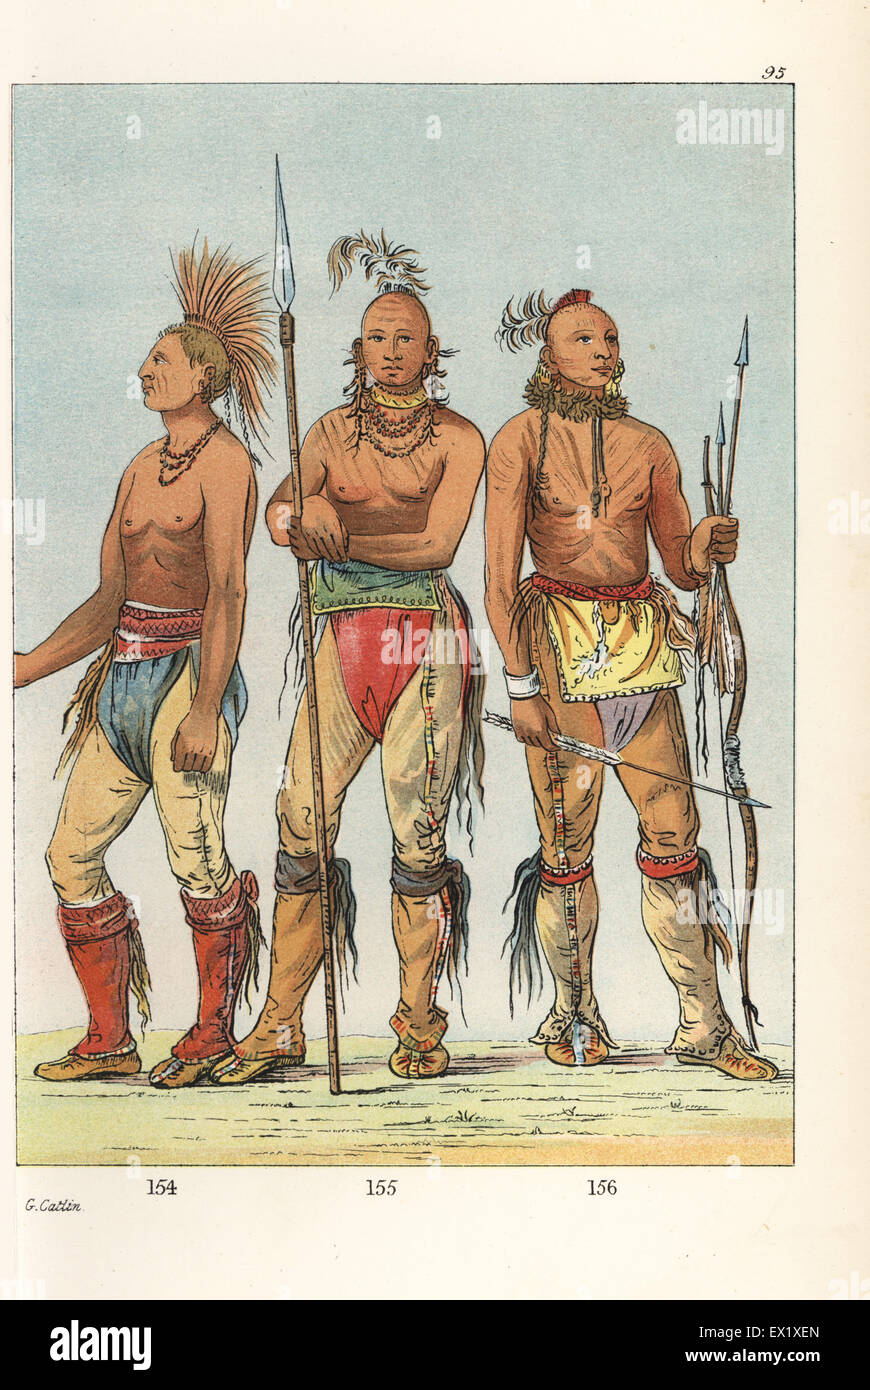 Young braves of the Osage nation: Ko-ha-tunk-a, Big Crow 154, Nah-com-e-shee, Man of the Bed 155, and Mun-ne-pus-kee, He Who is Not Afraid 156, in breech cloth, leggings and moccasins, garters decorated with beads and wampun. Handcoloured lithograph from George Catlin's Manners, Customs and Condition of the North American Indians, London, 1841. Stock Photo